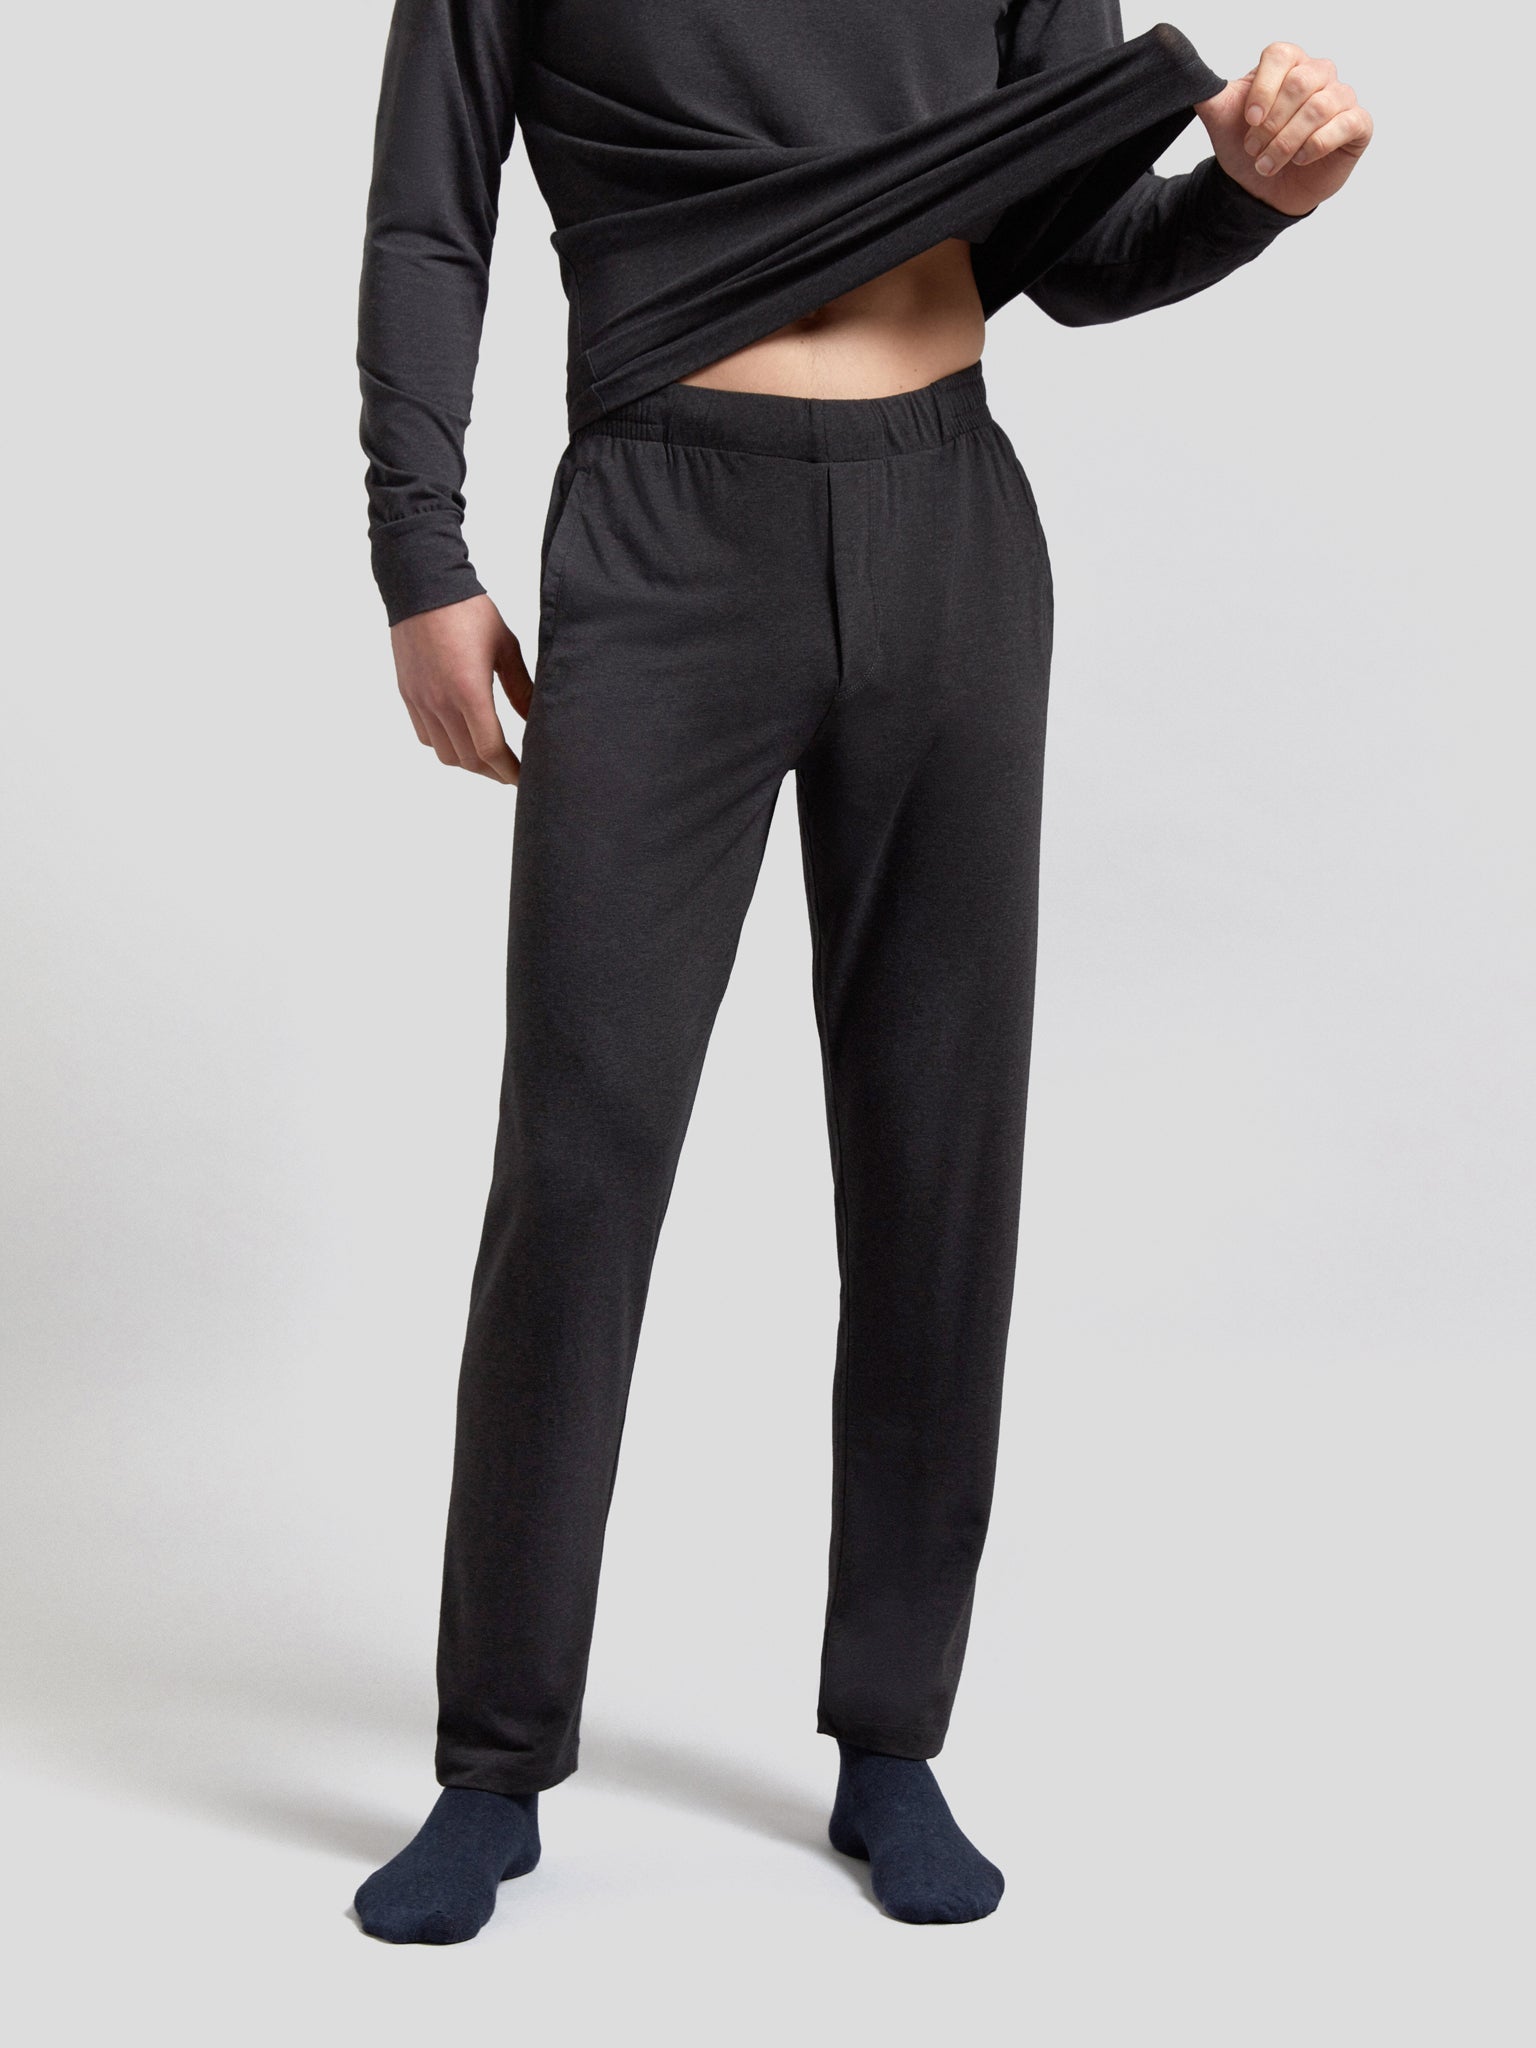 Lounge Trousers - Charcoal Lyocell Cotton